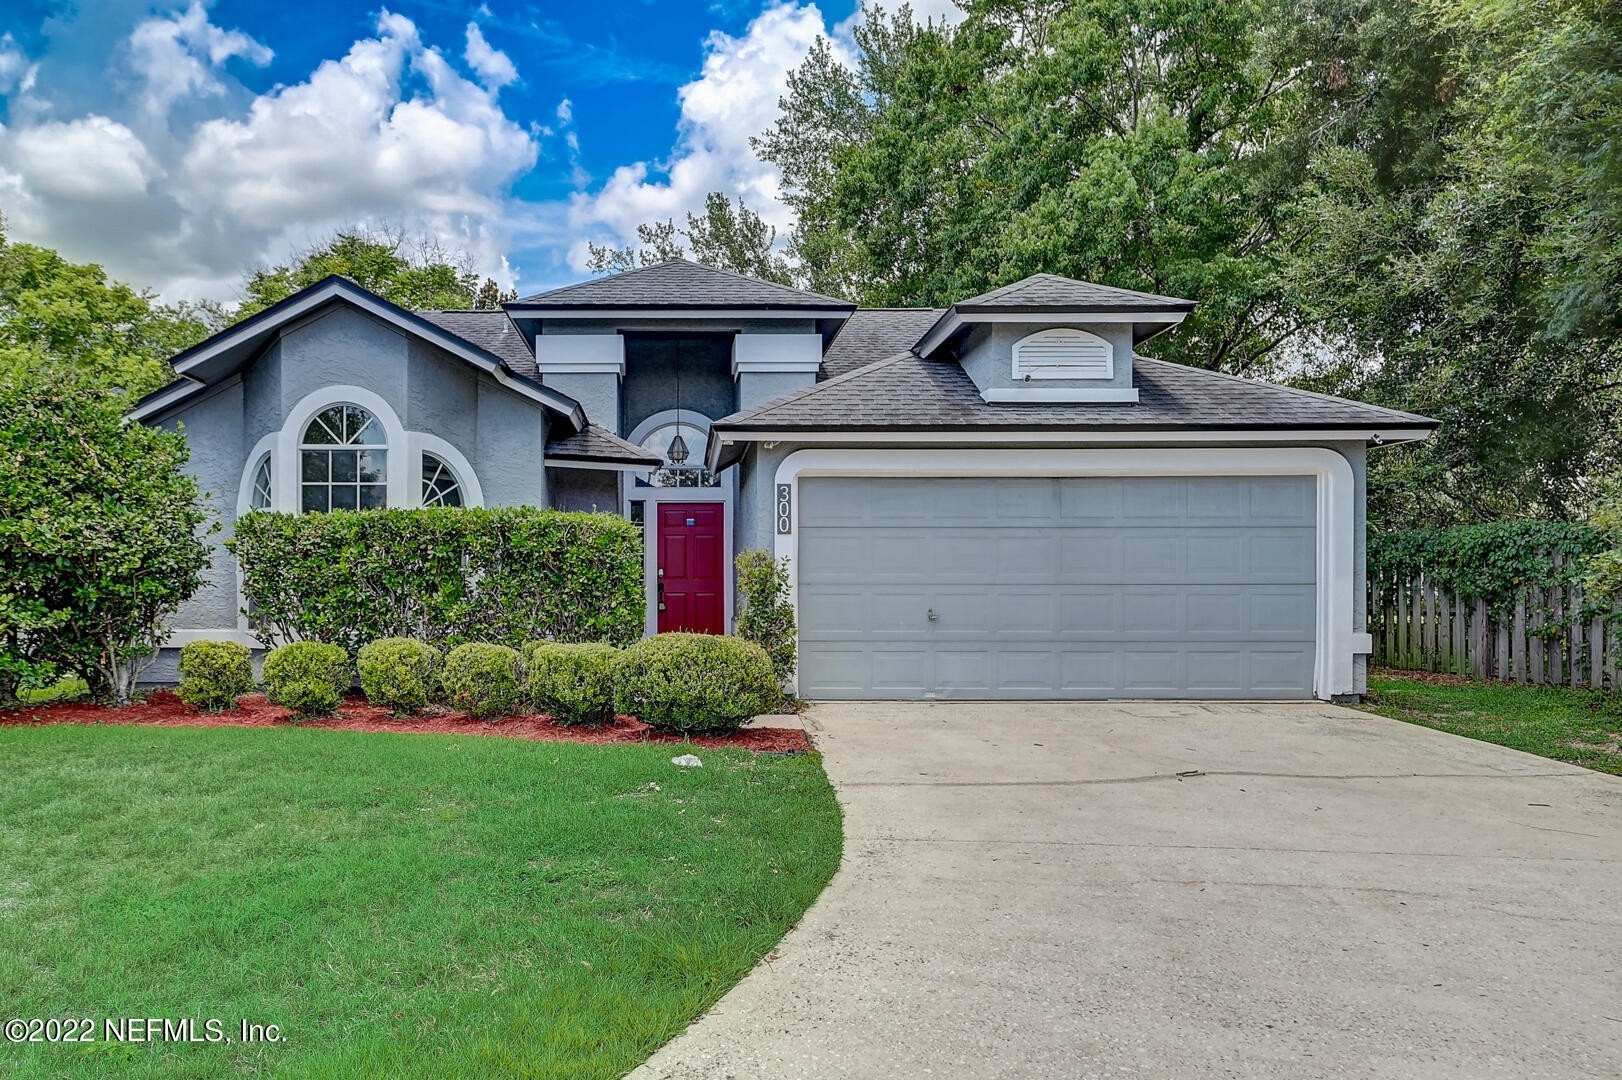 Single Family Home for Sale at Bellair Meadowbrook Terrace, Orange Park, FL 32073